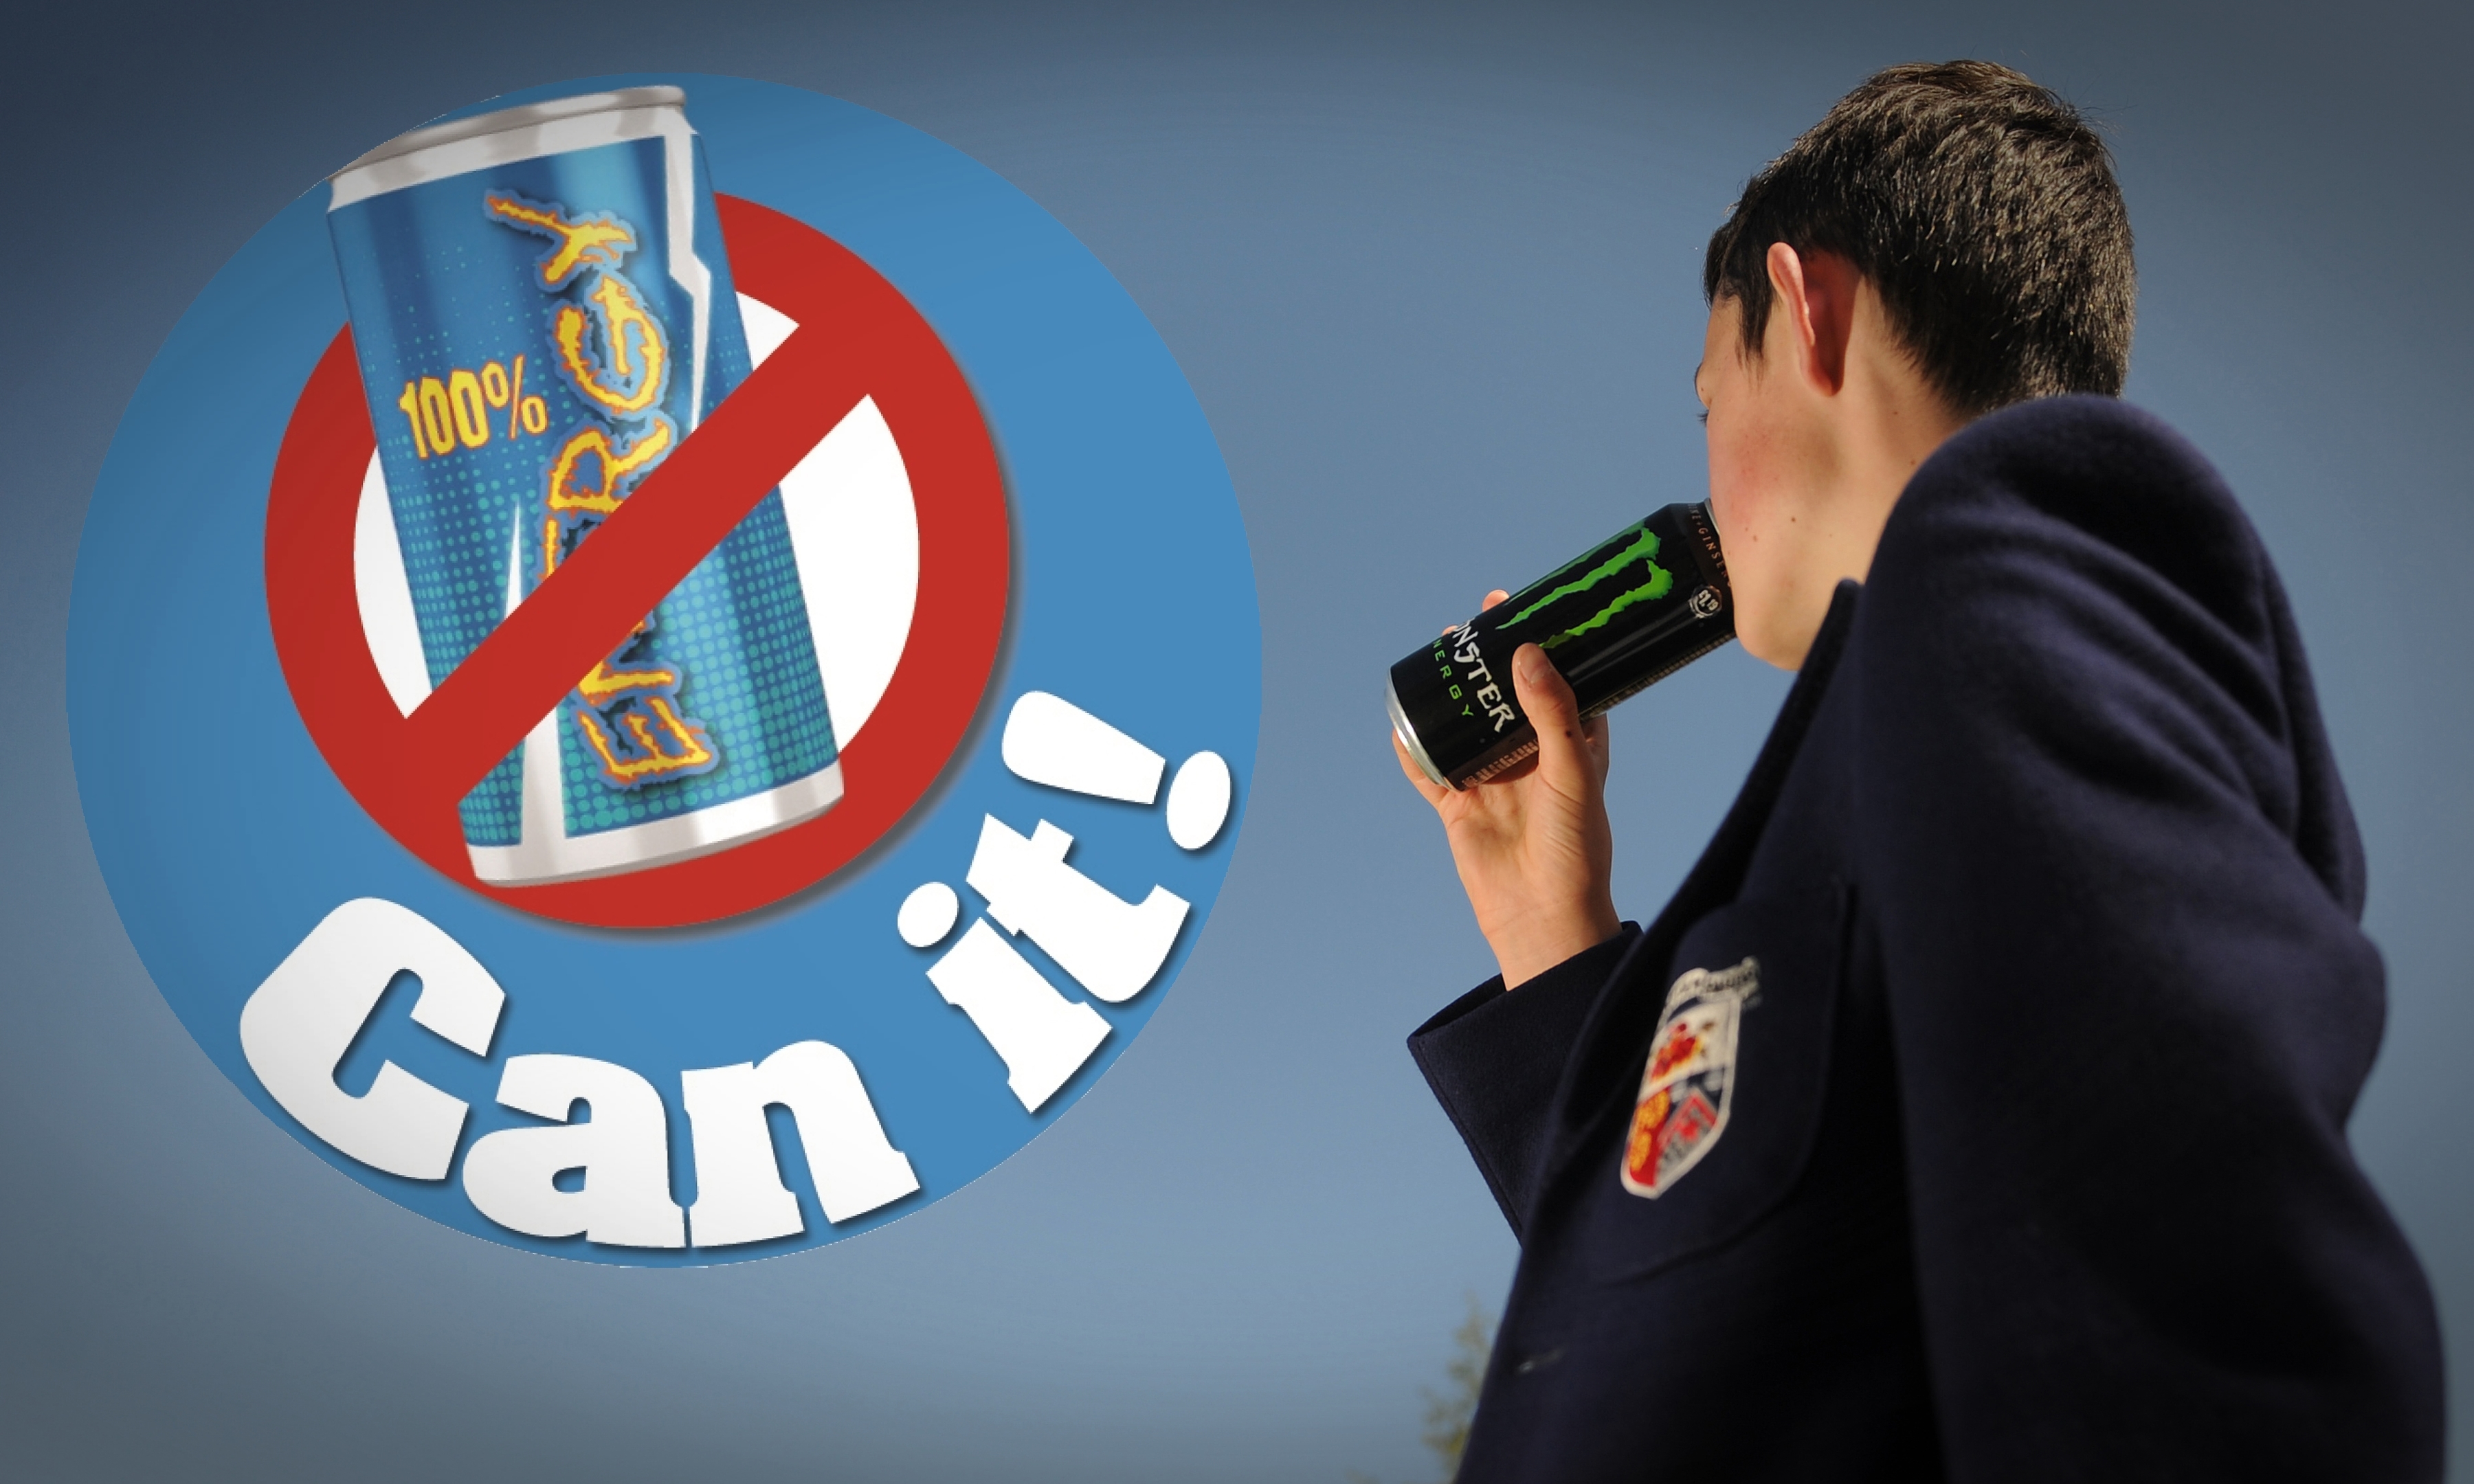 The Courier wants to see energy drinks banned from schools.